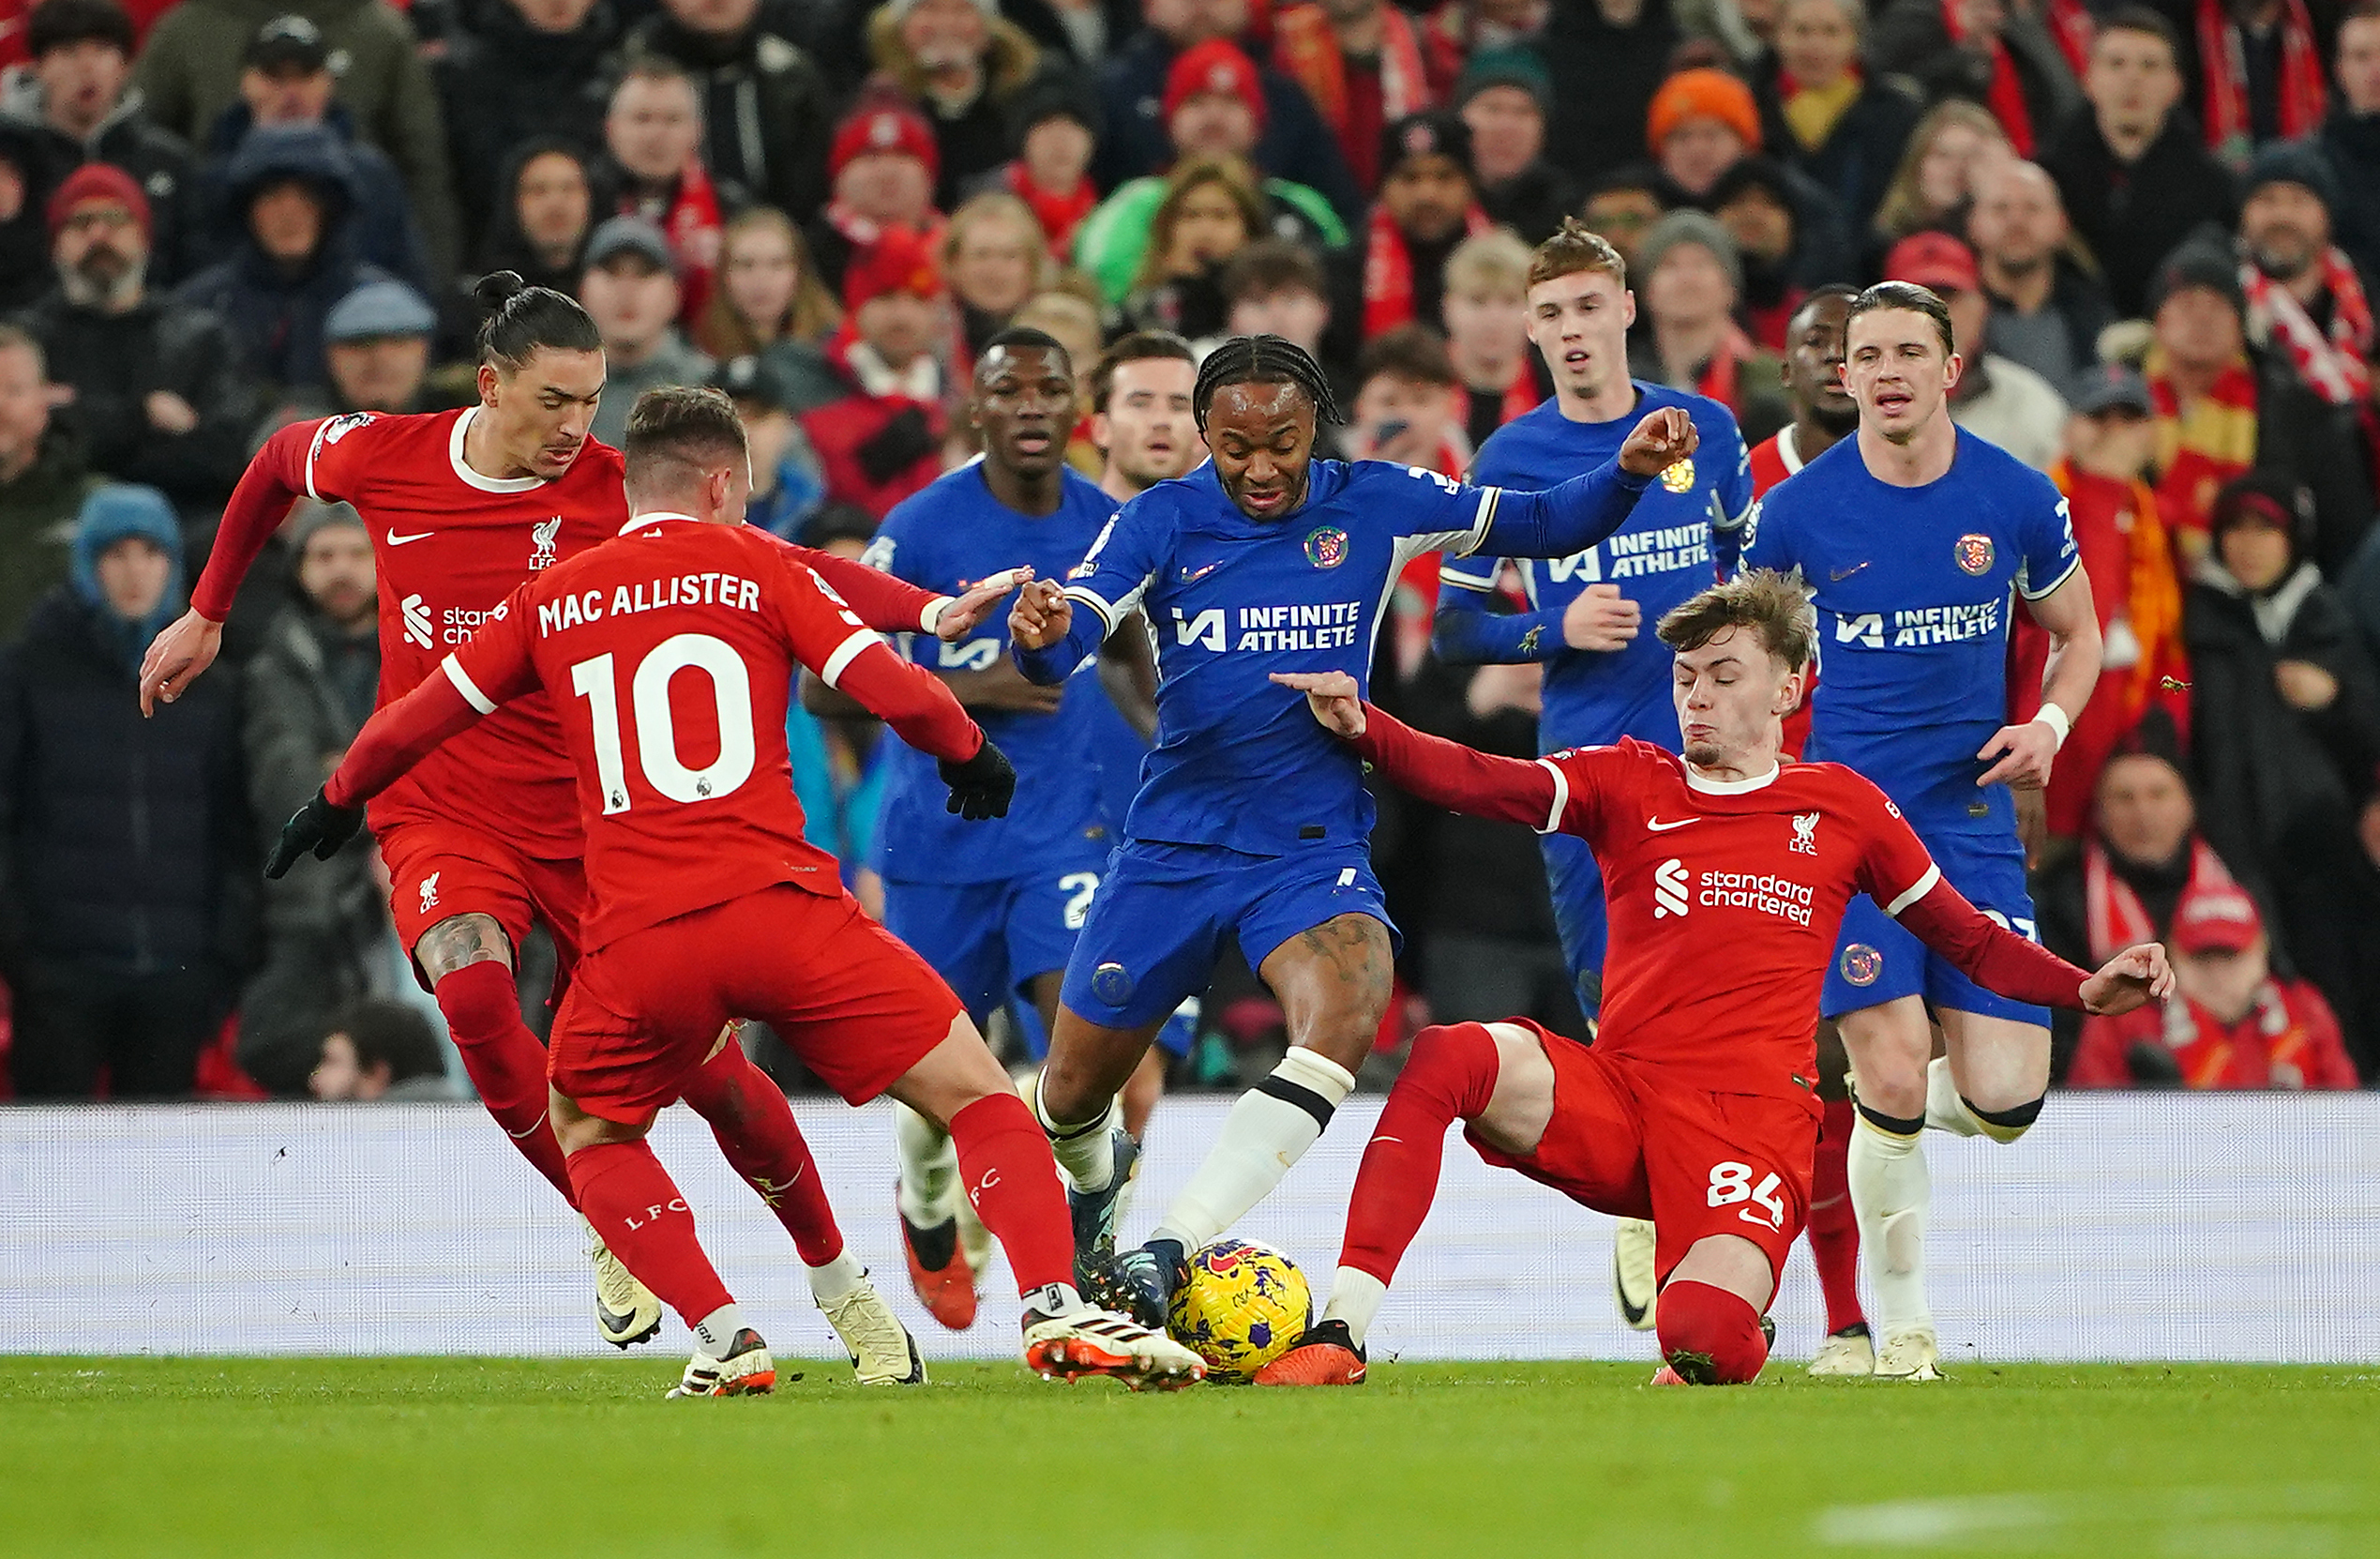 Liverpool play Chelsea at Anfield